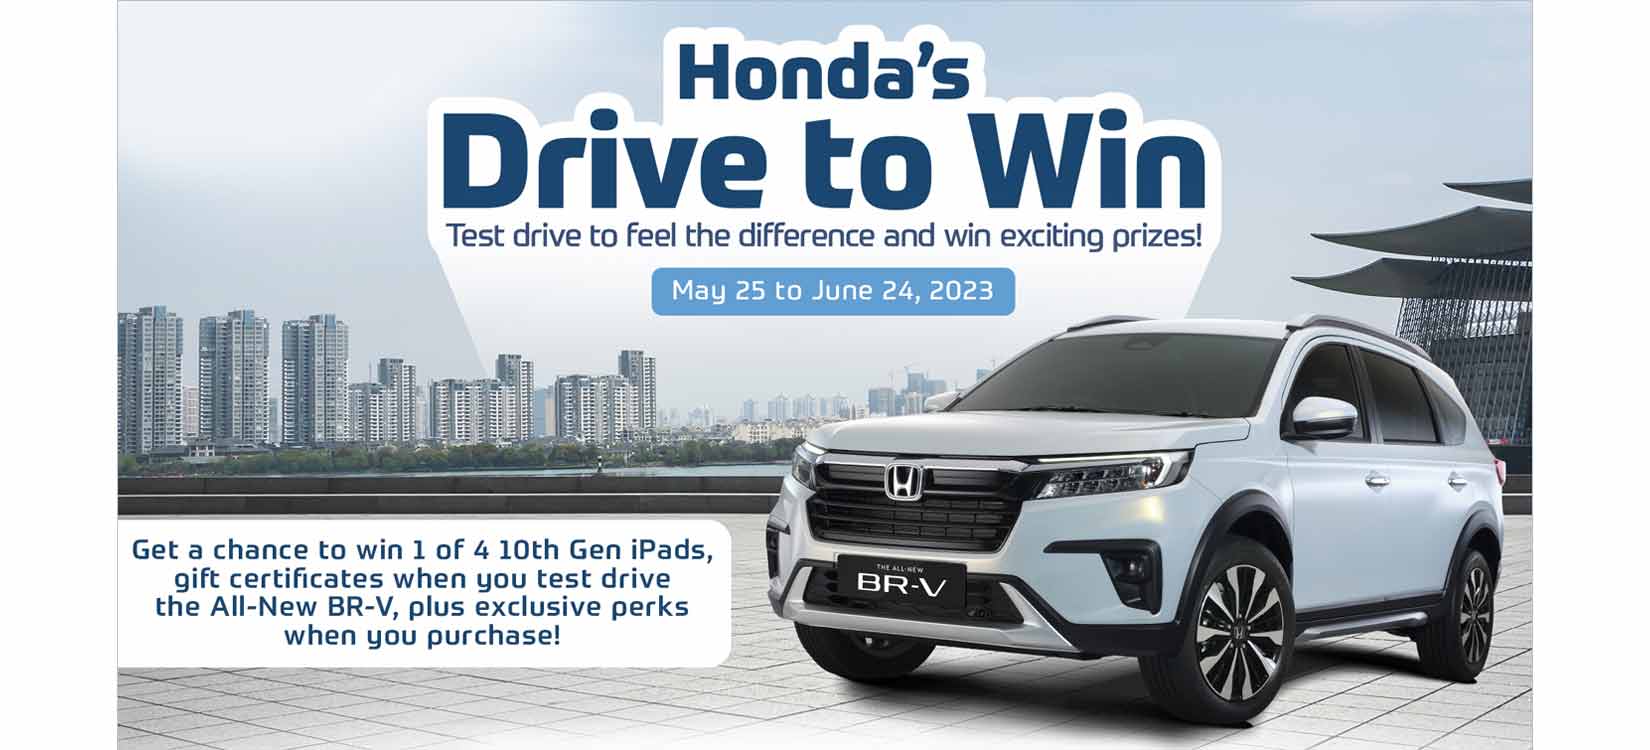 Honda Cars Philippines › Spruce up your All-New BR-V with Honda